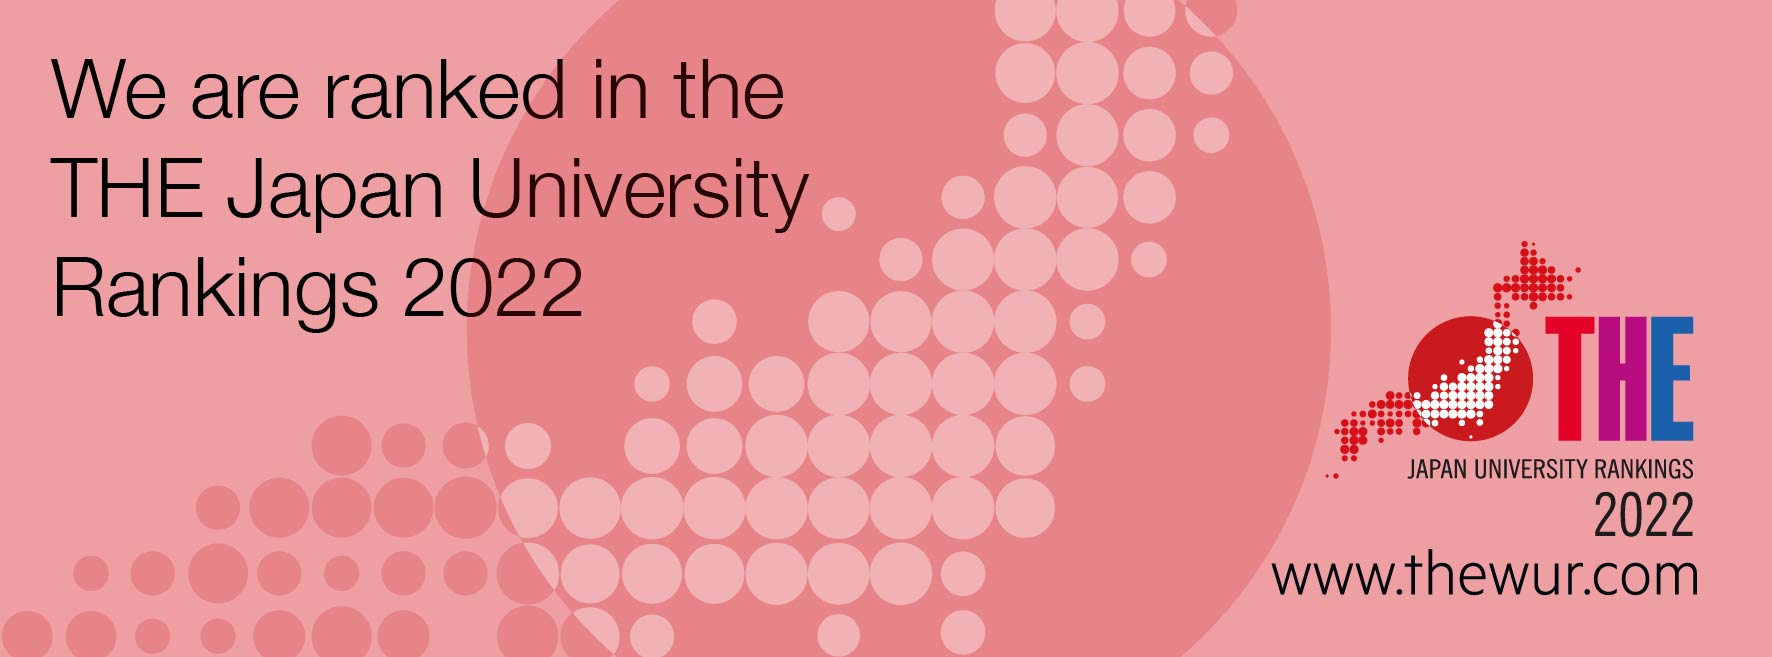 Results of the THE Japan University Rankings reveals high regard for TUS' educational strength